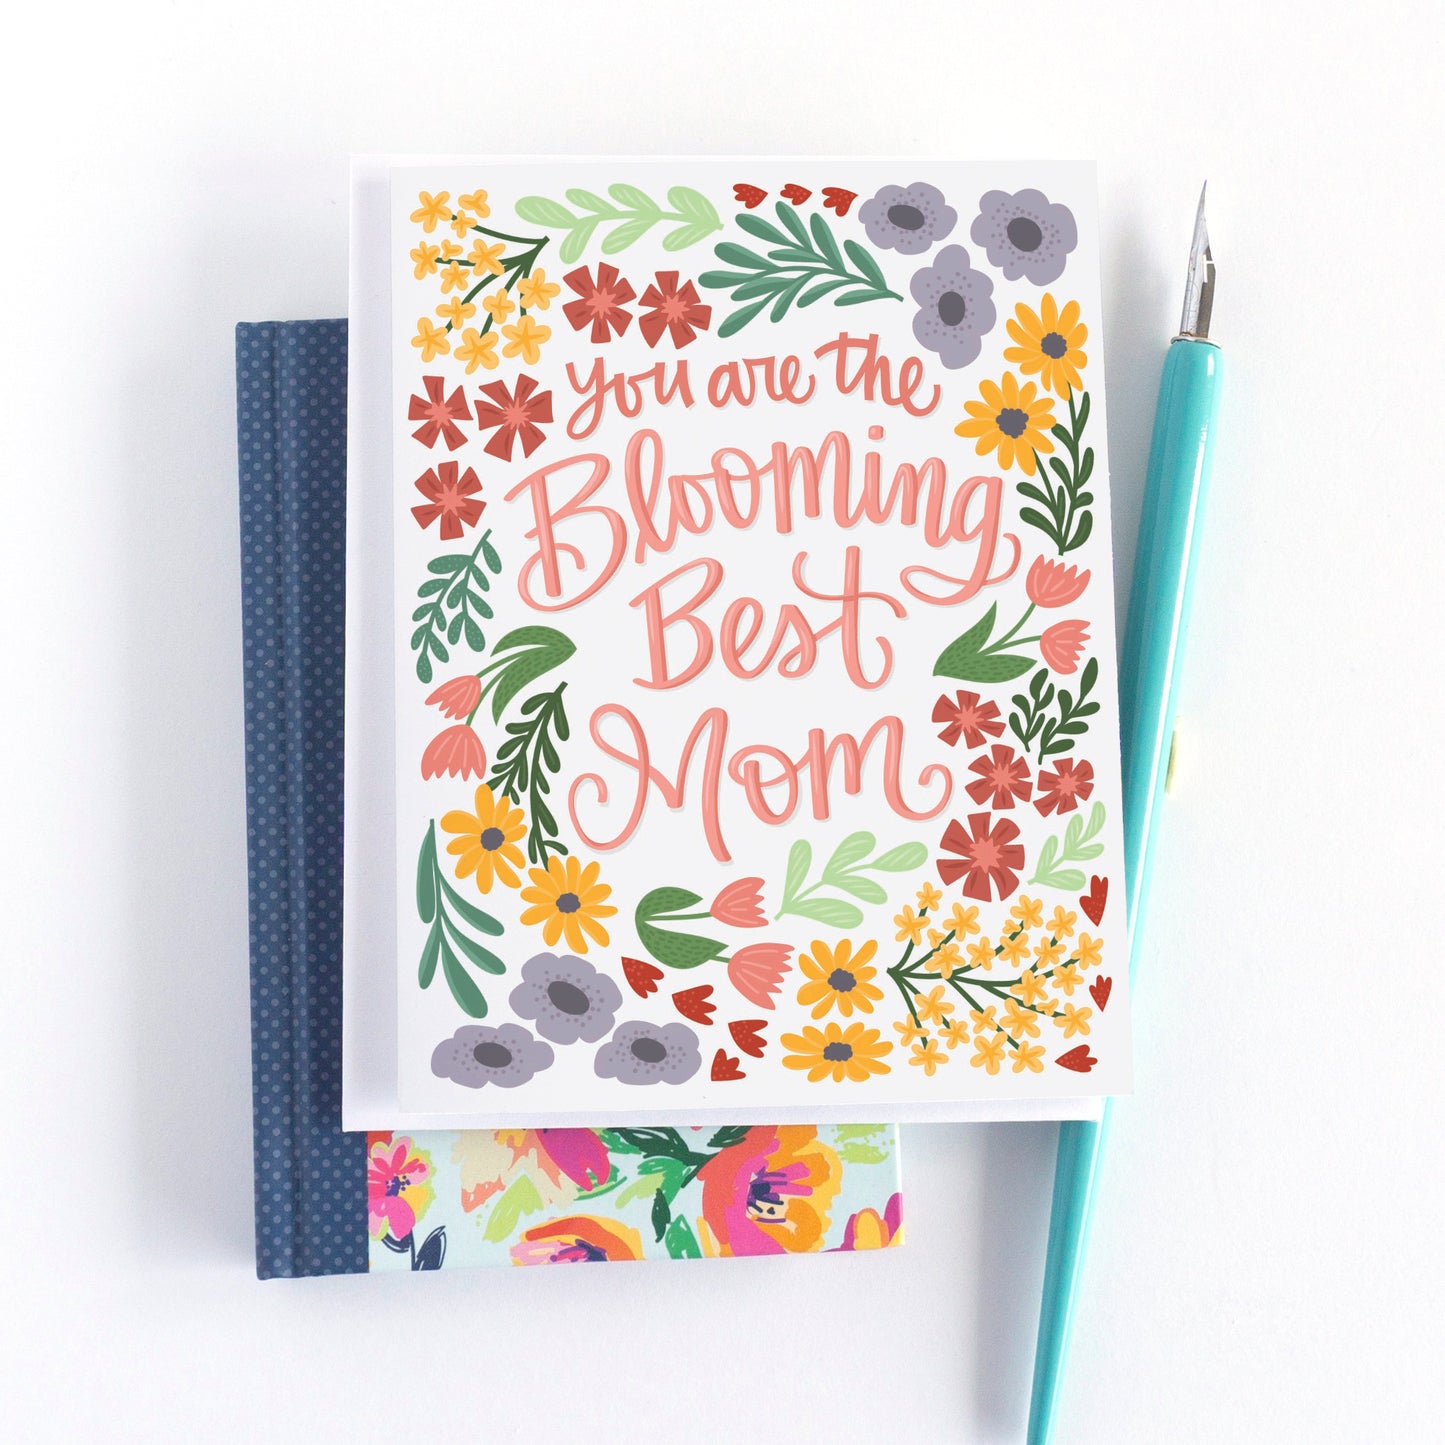 You are the Blooming Best Mom Floral Mother's Day Card